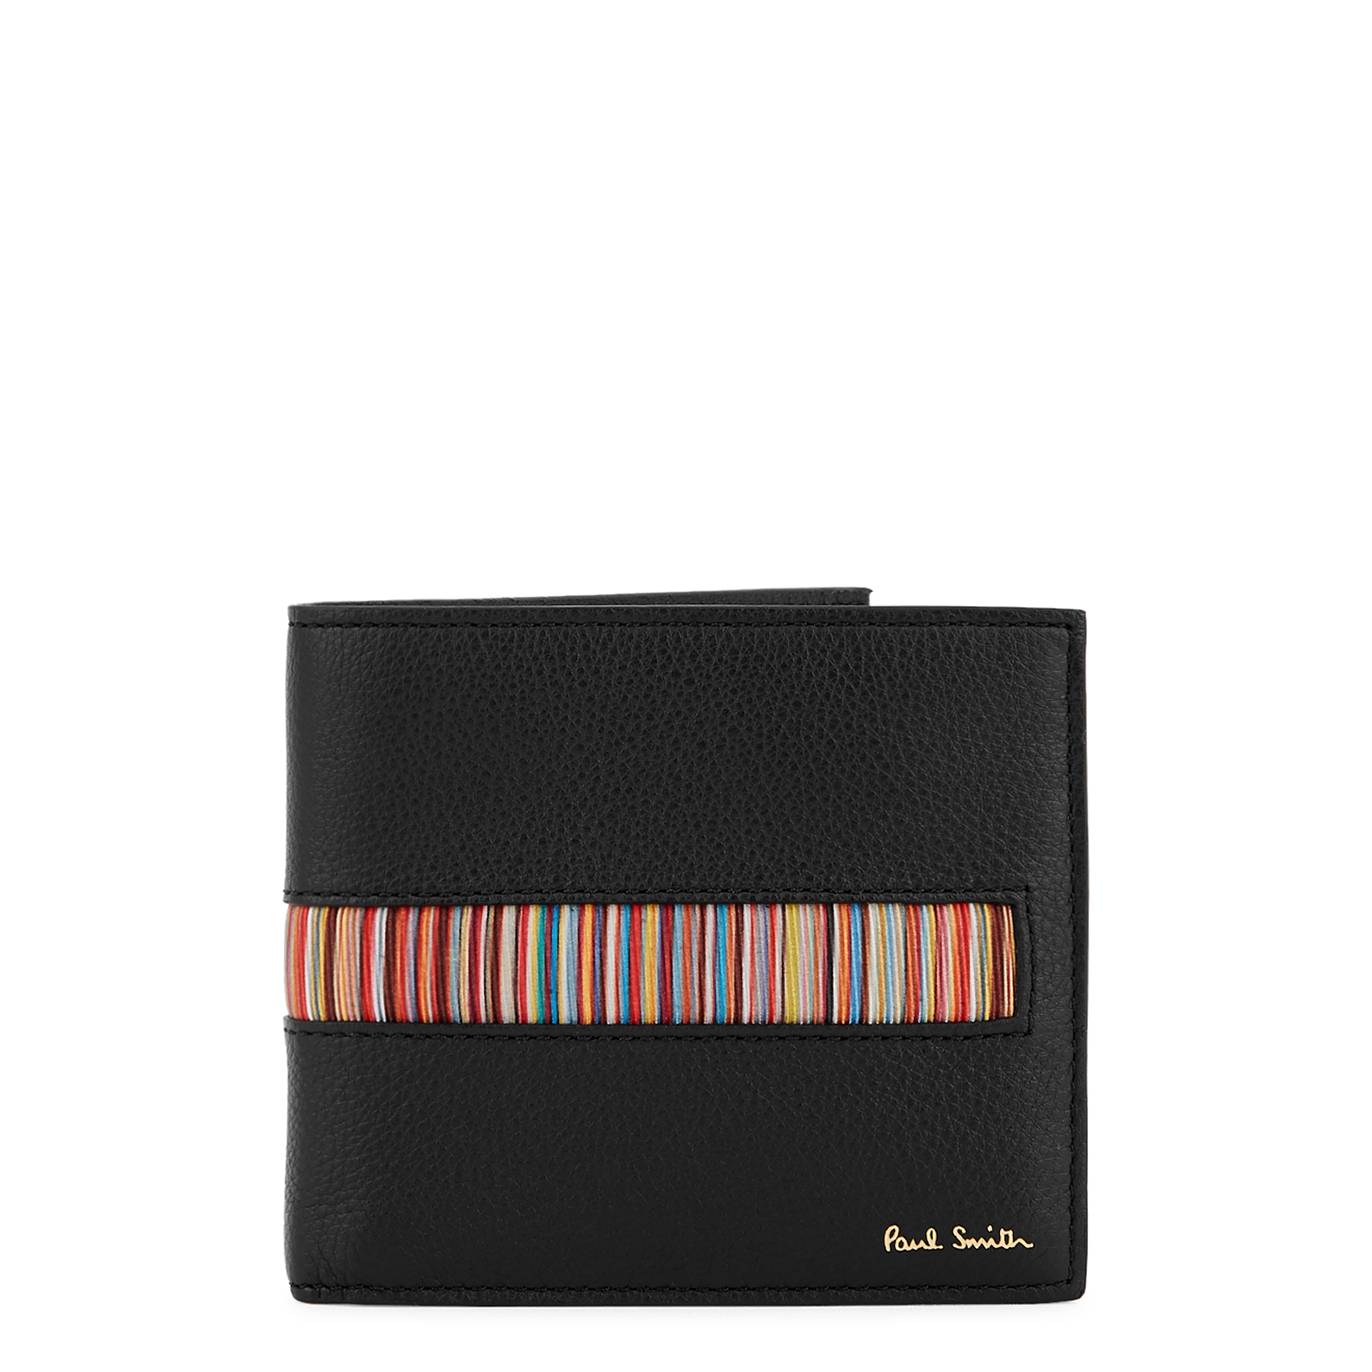 Paul Smith Black Panelled Leather Wallet